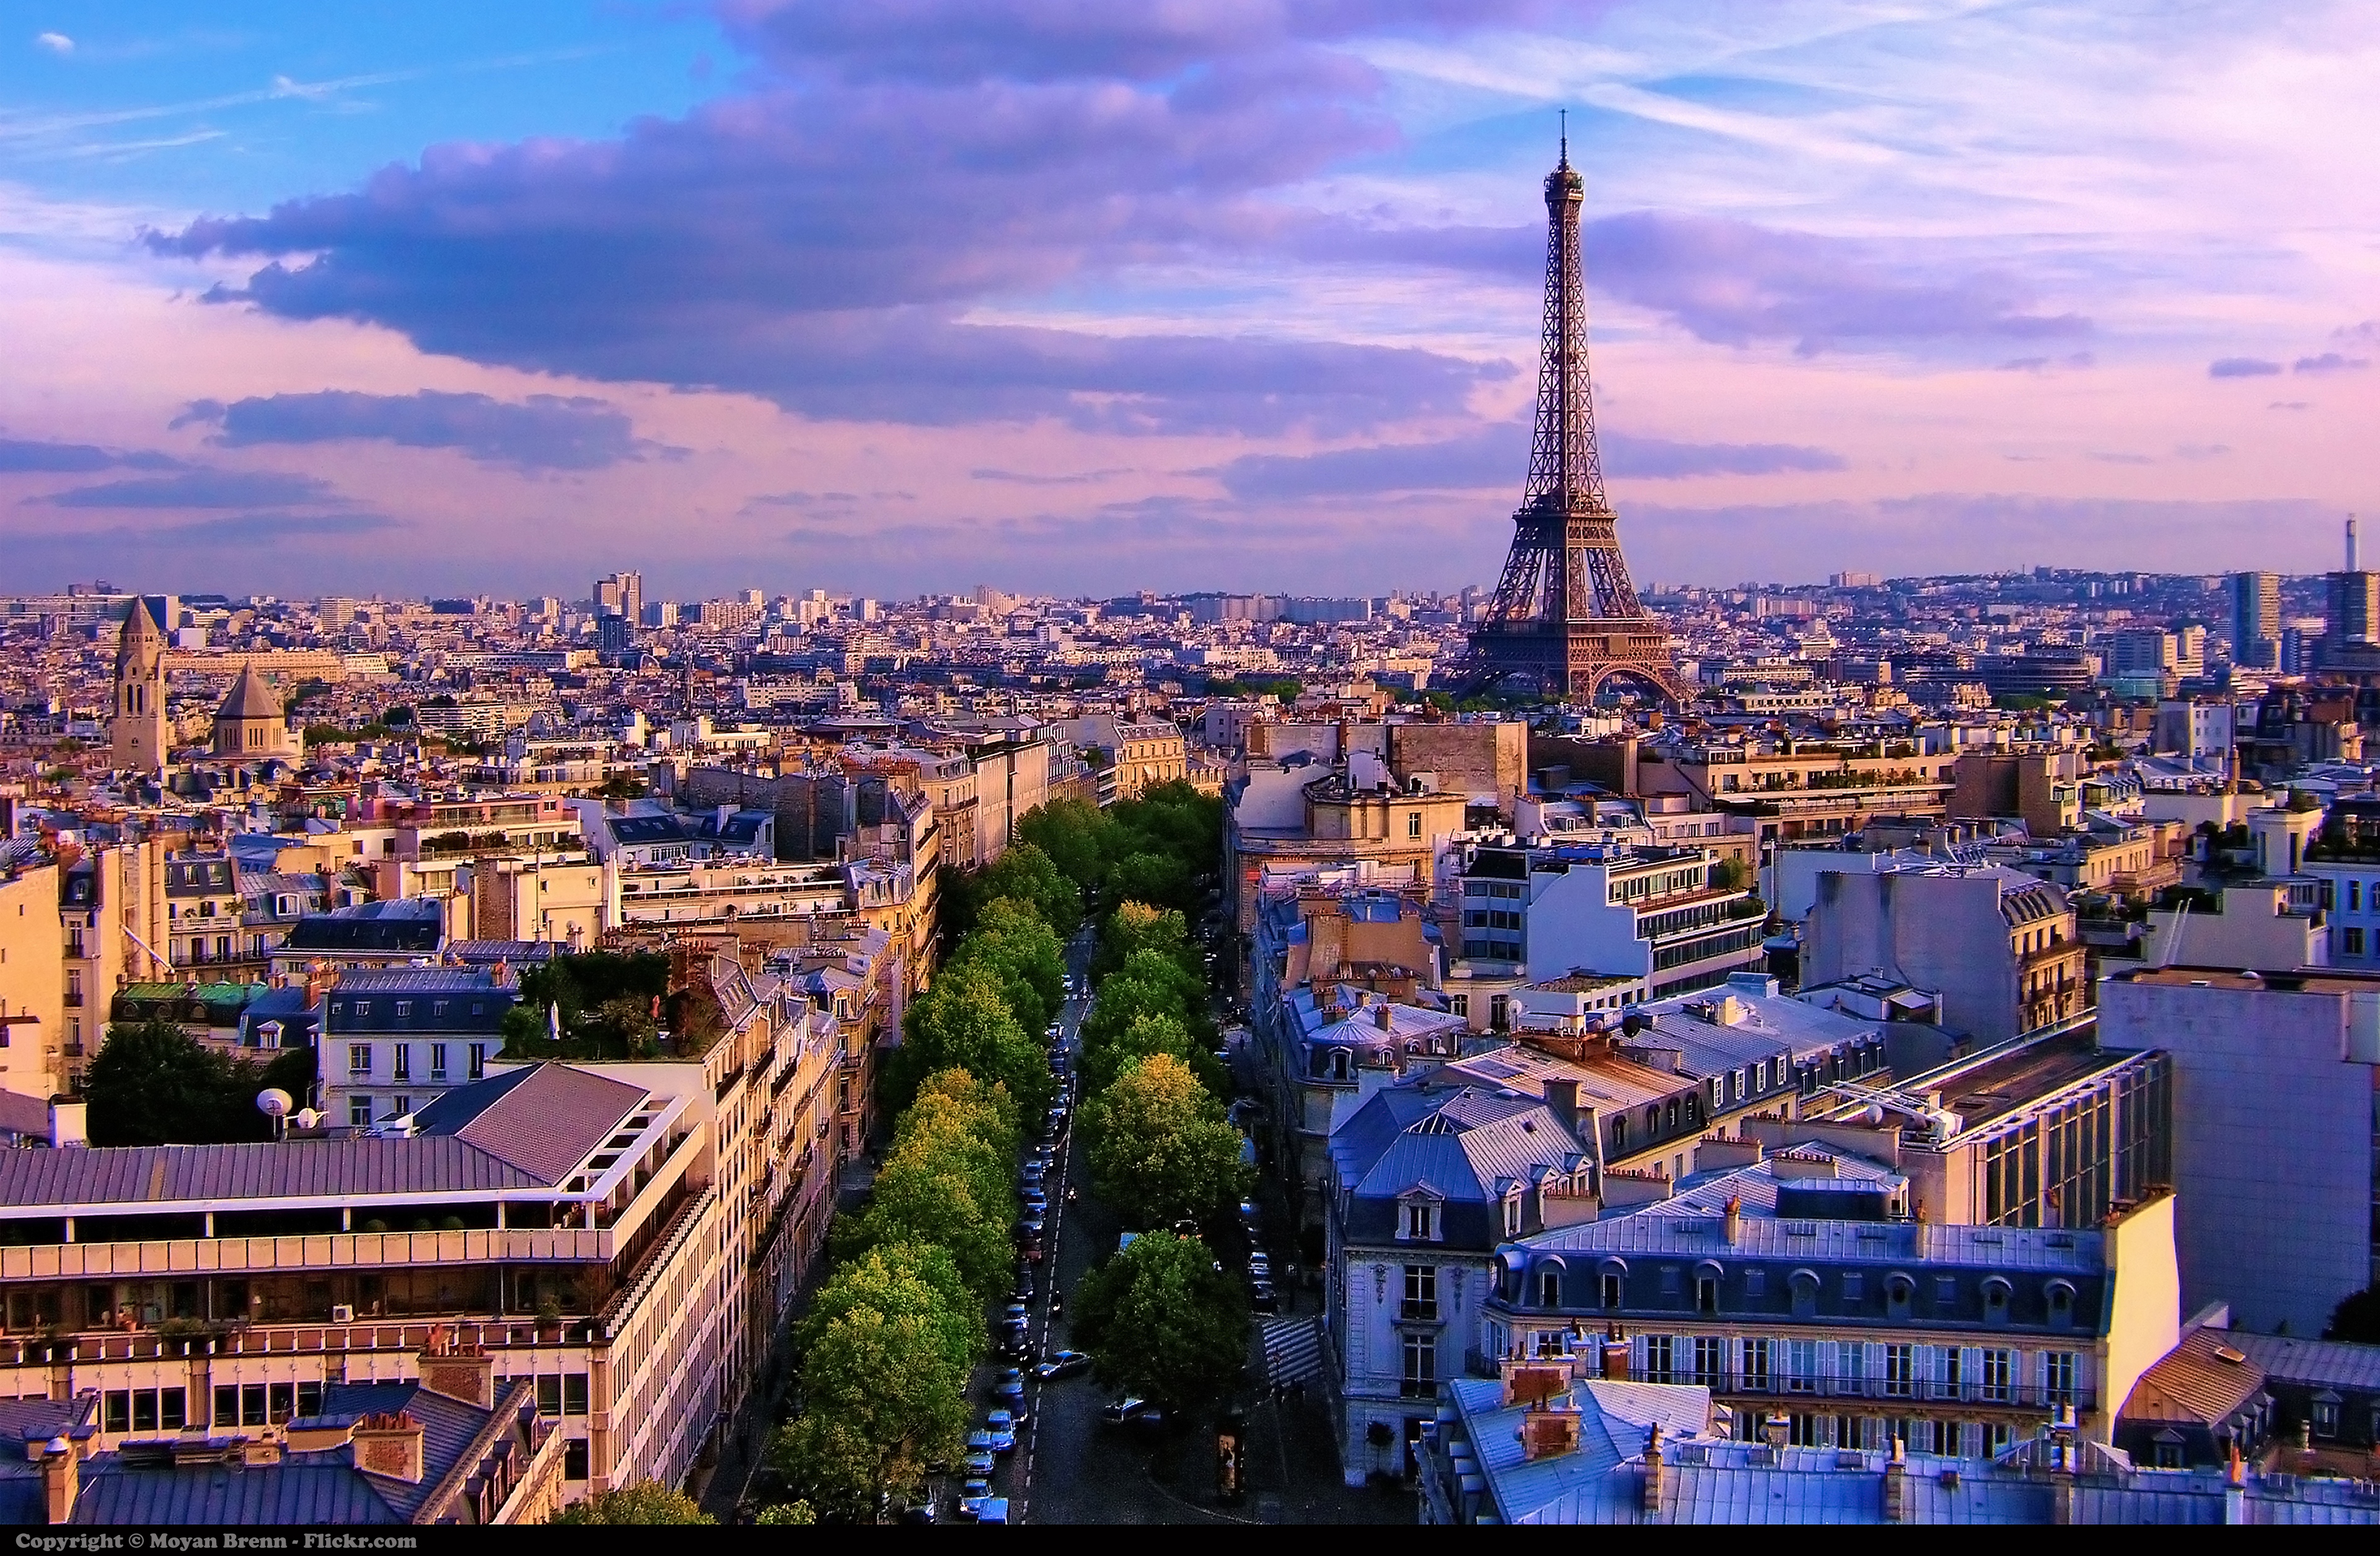 Paris travel guide for first-time visitors - Best Places to Visit in Europe - planningforeurope.com (1)